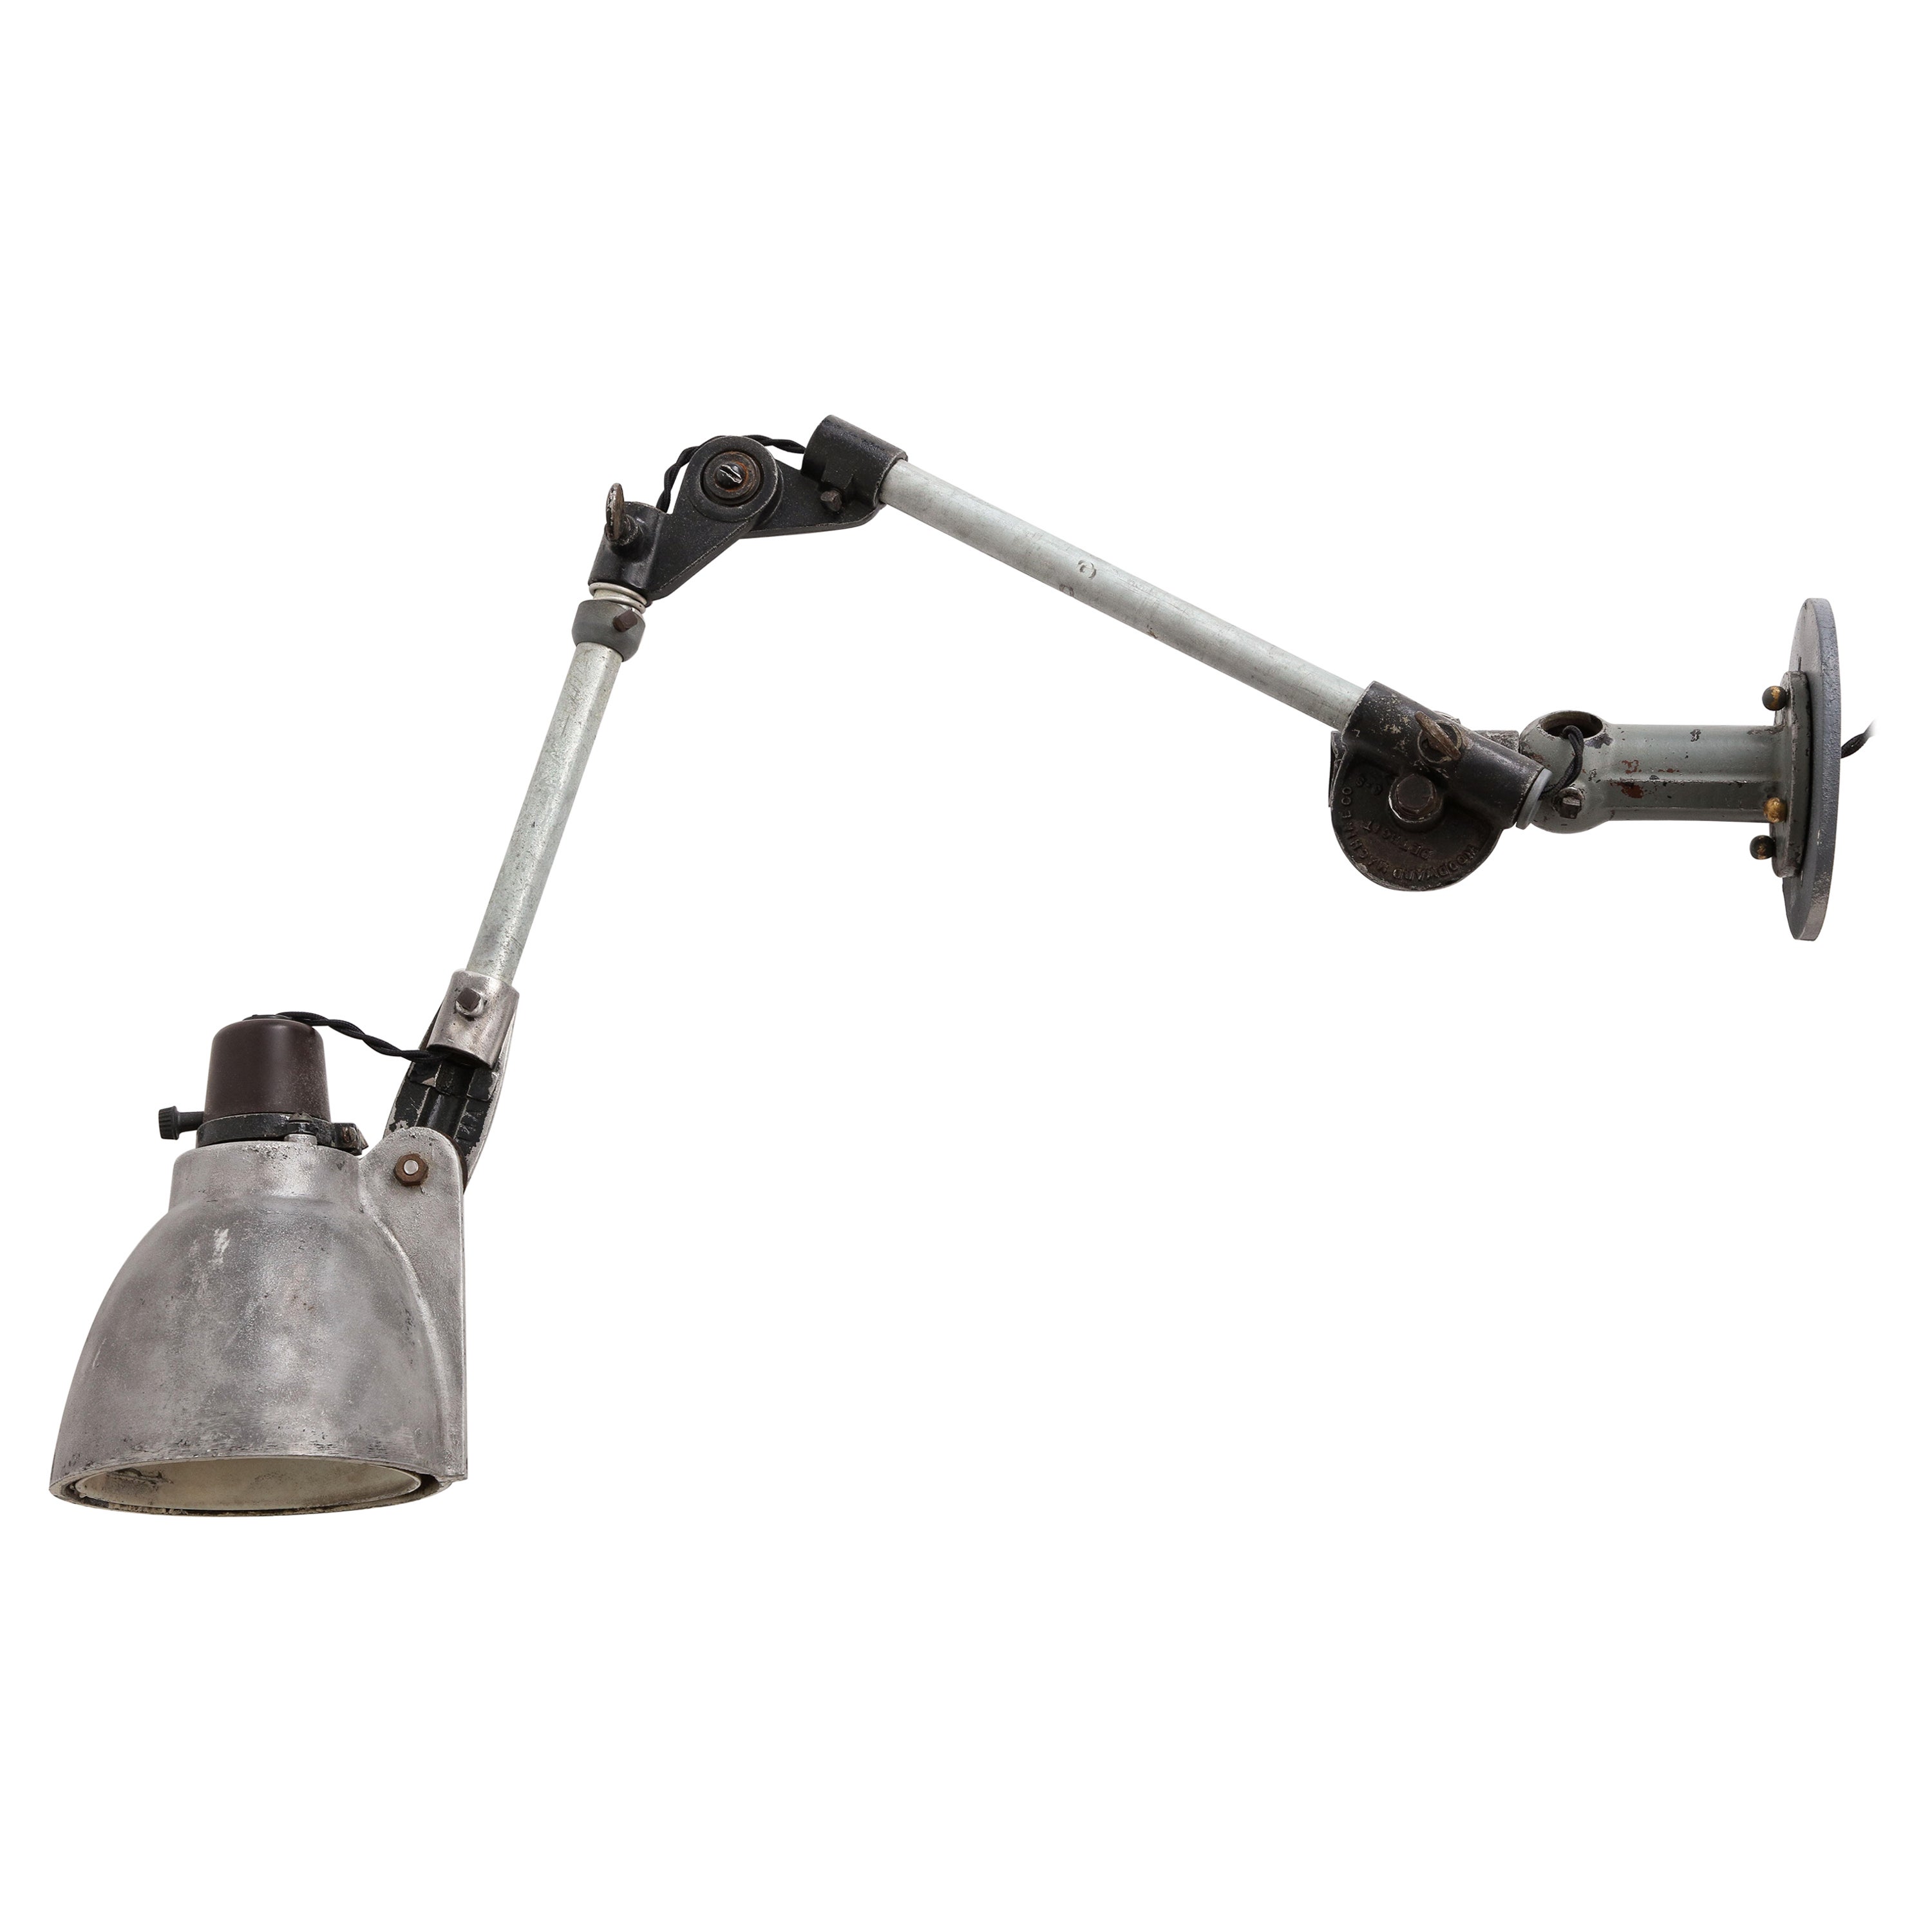 Industrial Anglepoise Wall Mounted Cast Iron Sconce, c. 1940